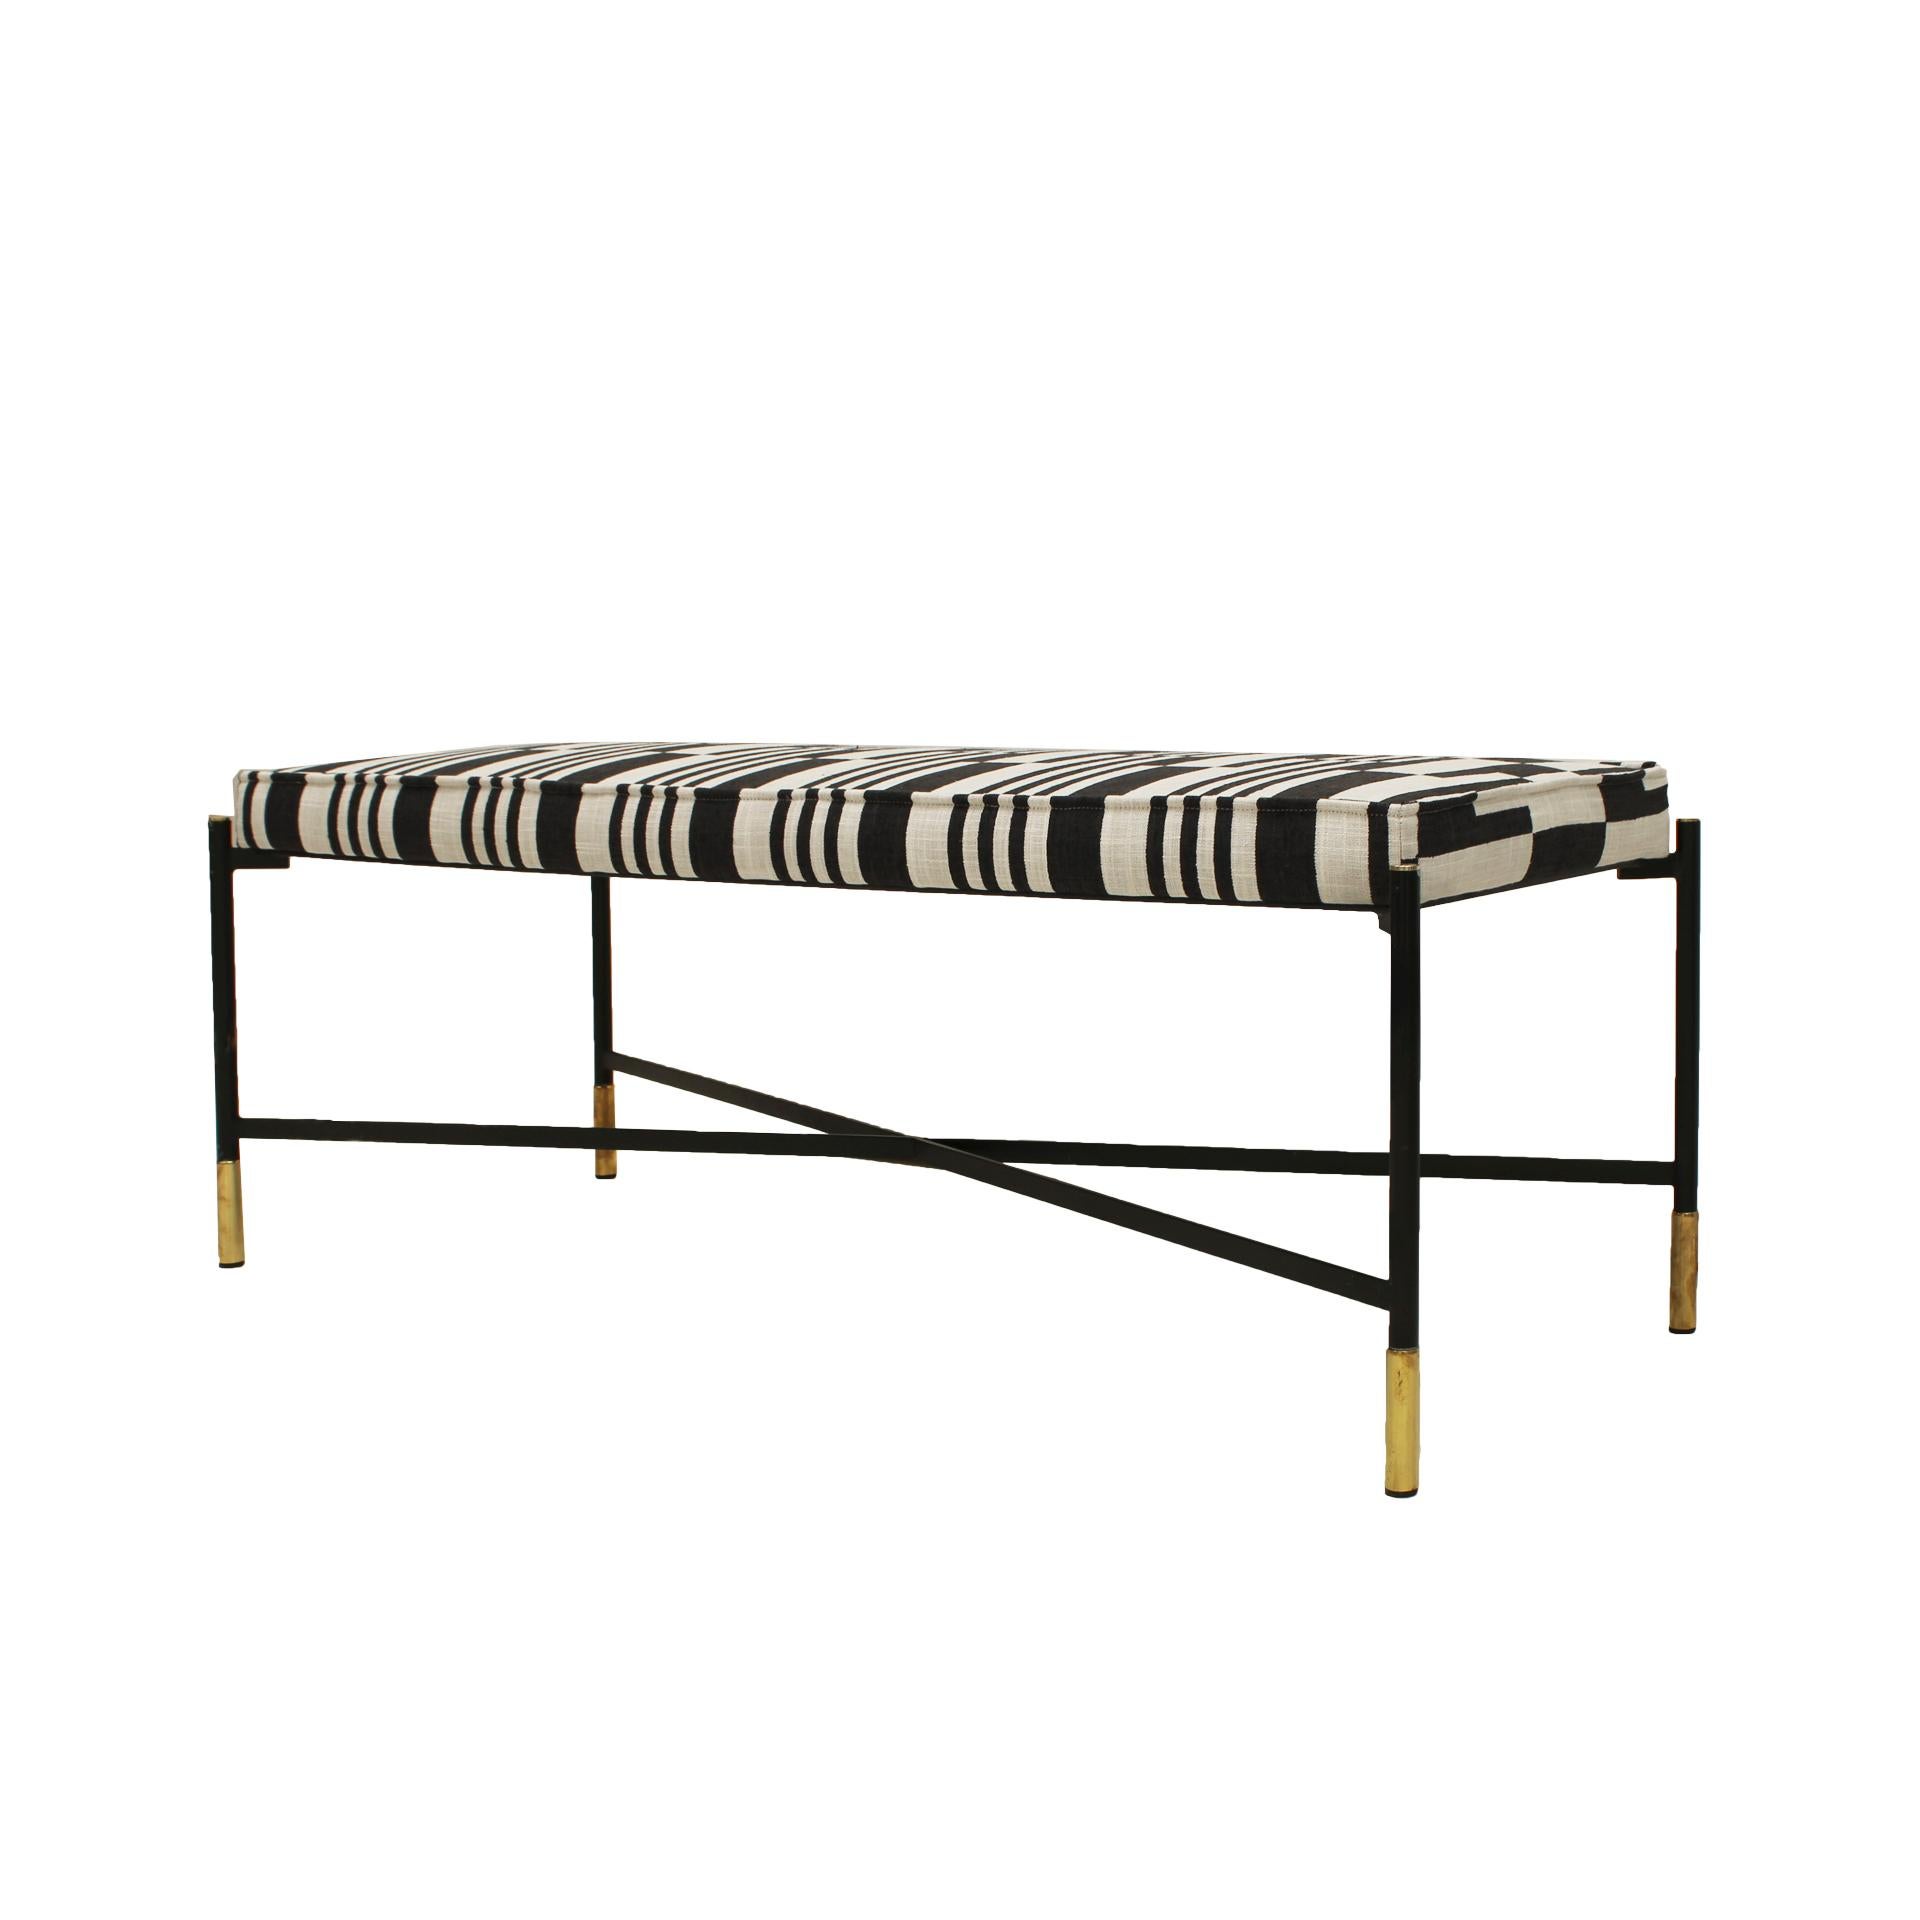 Footstool with Ico Parisi style structure, made with lacquered iron structure in black and legs ending in brass sleeves. Reupholstered in linen fabric with a black and white rectangular print design.

Every item LA Studio offers is checked by our